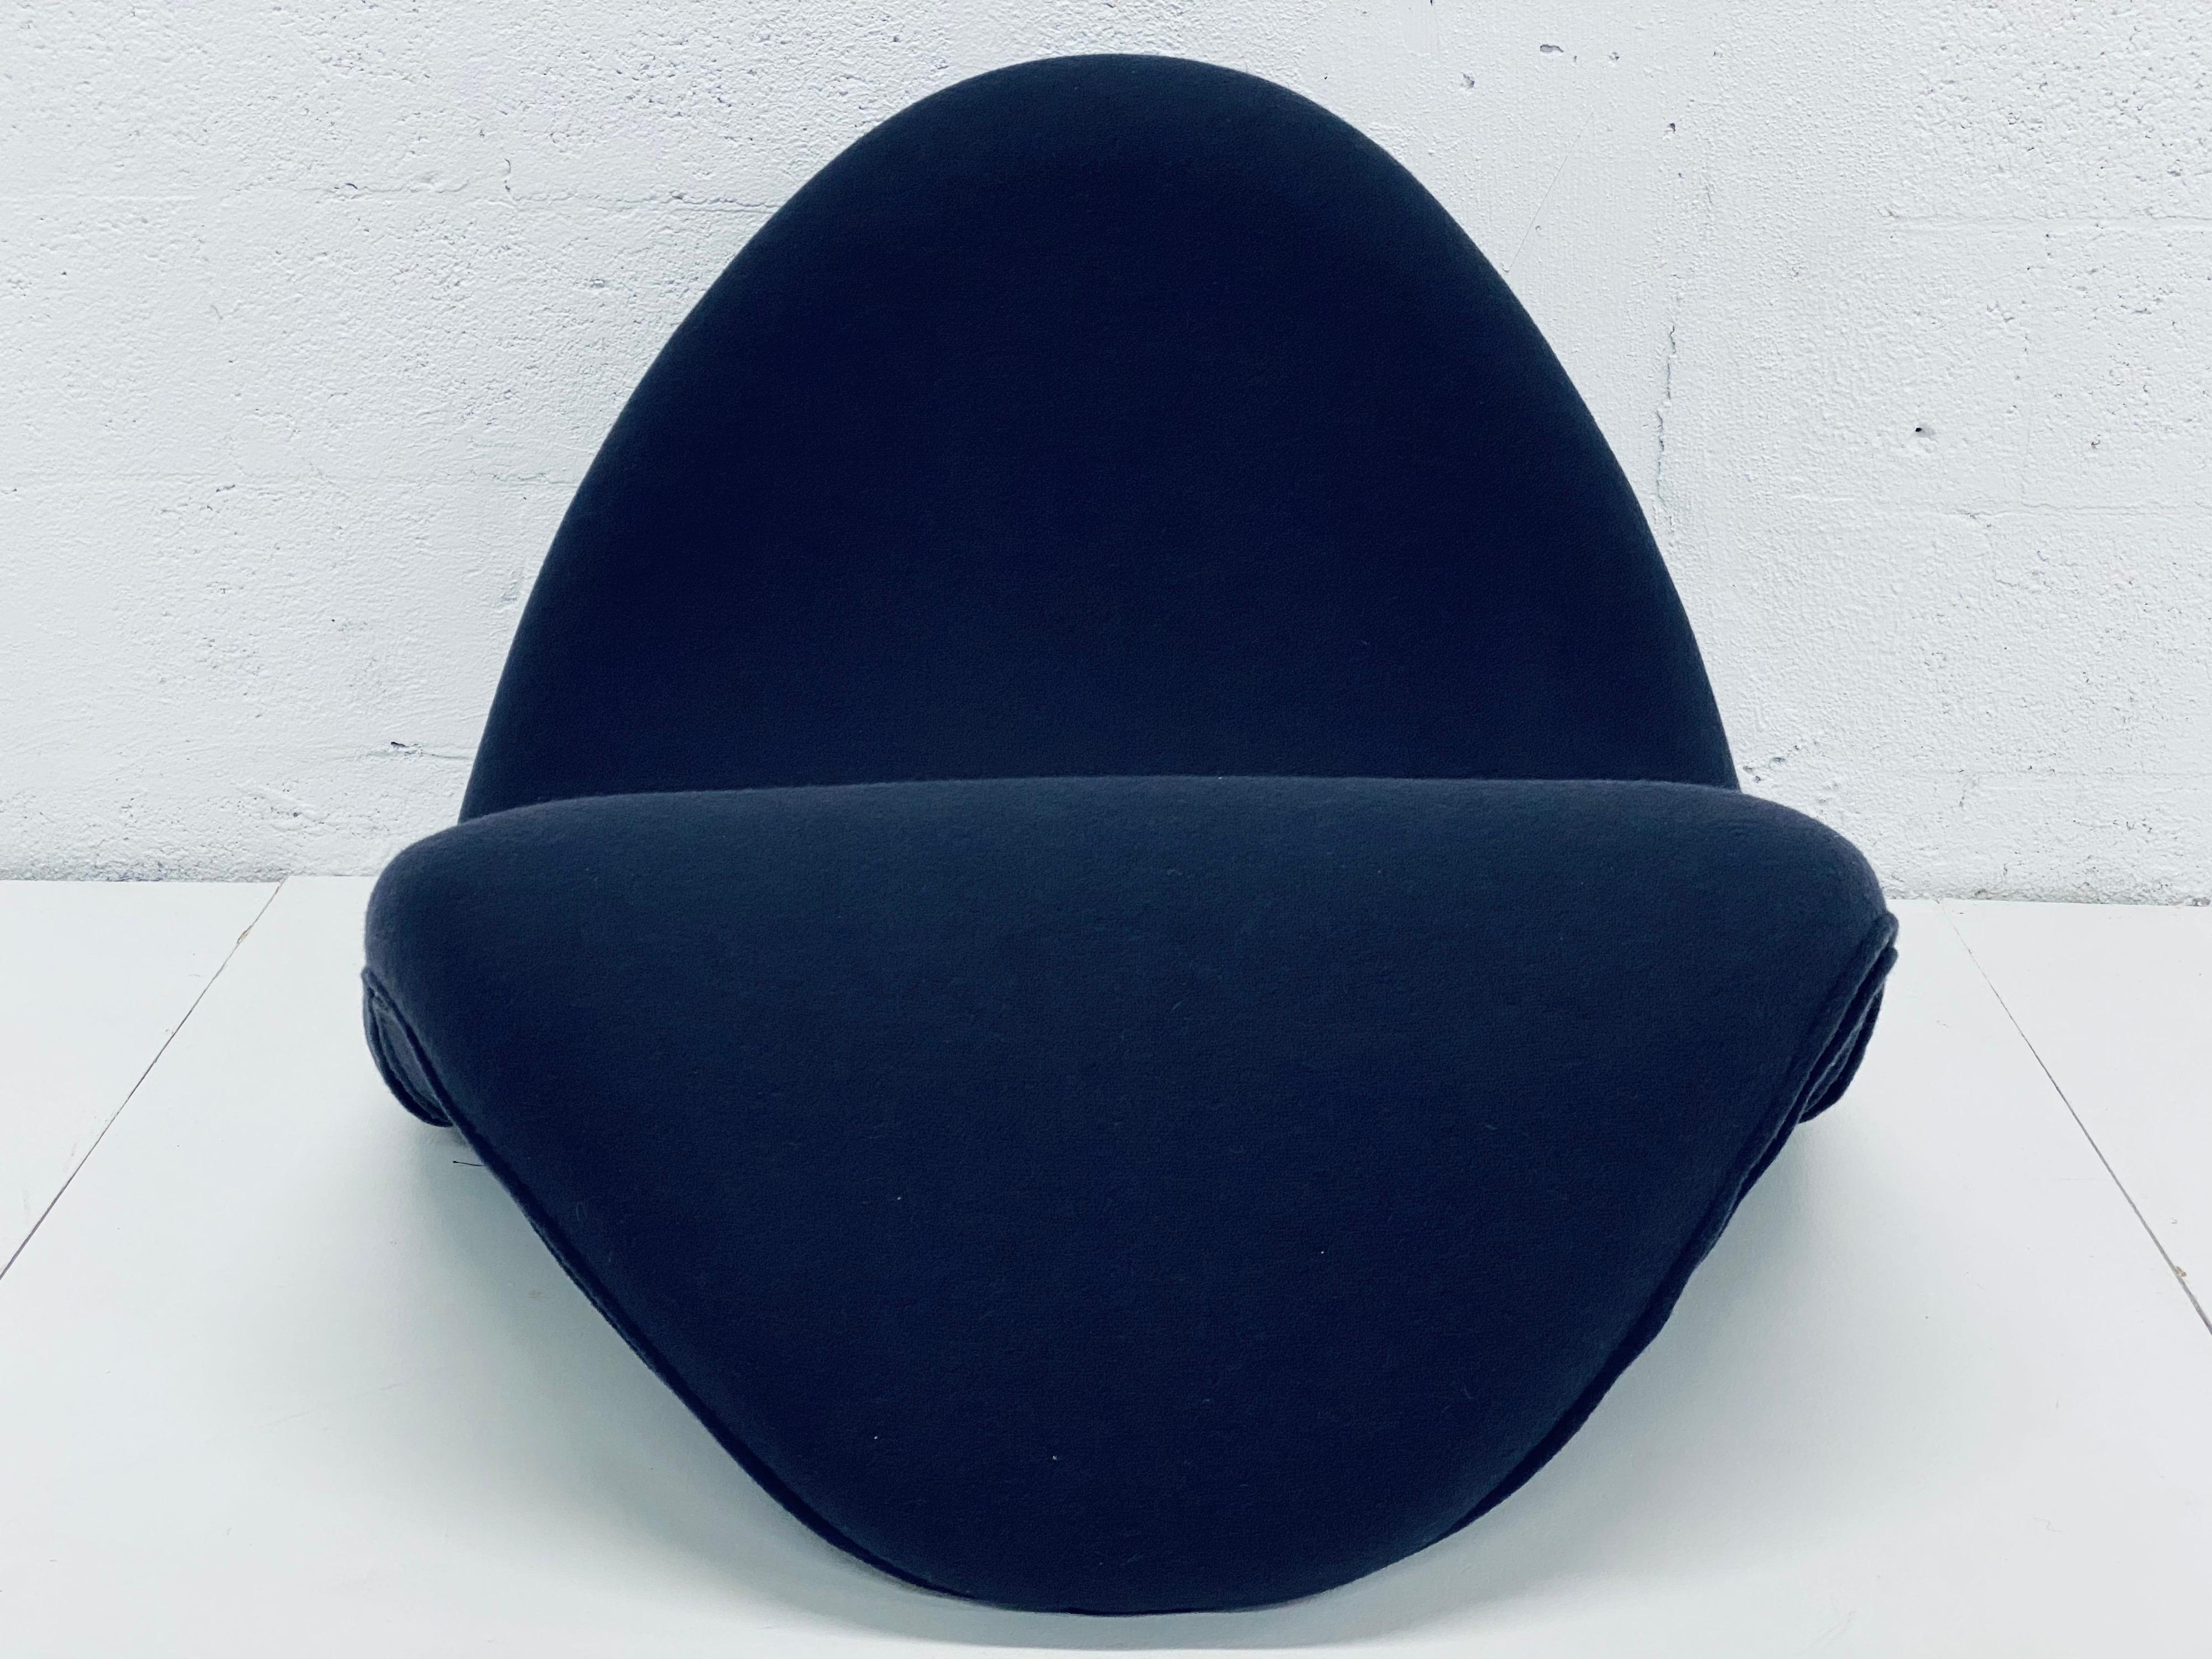 Original 1960s Pierre Paulin Tongue chair manufactured by Artifort. The lounge chair has been restored and newly upholstered in black (# 0690) Nina Koppel for Artifort Tonus 4 Fabric. Extremely comfortable and lightweight, this Tongue chair is the